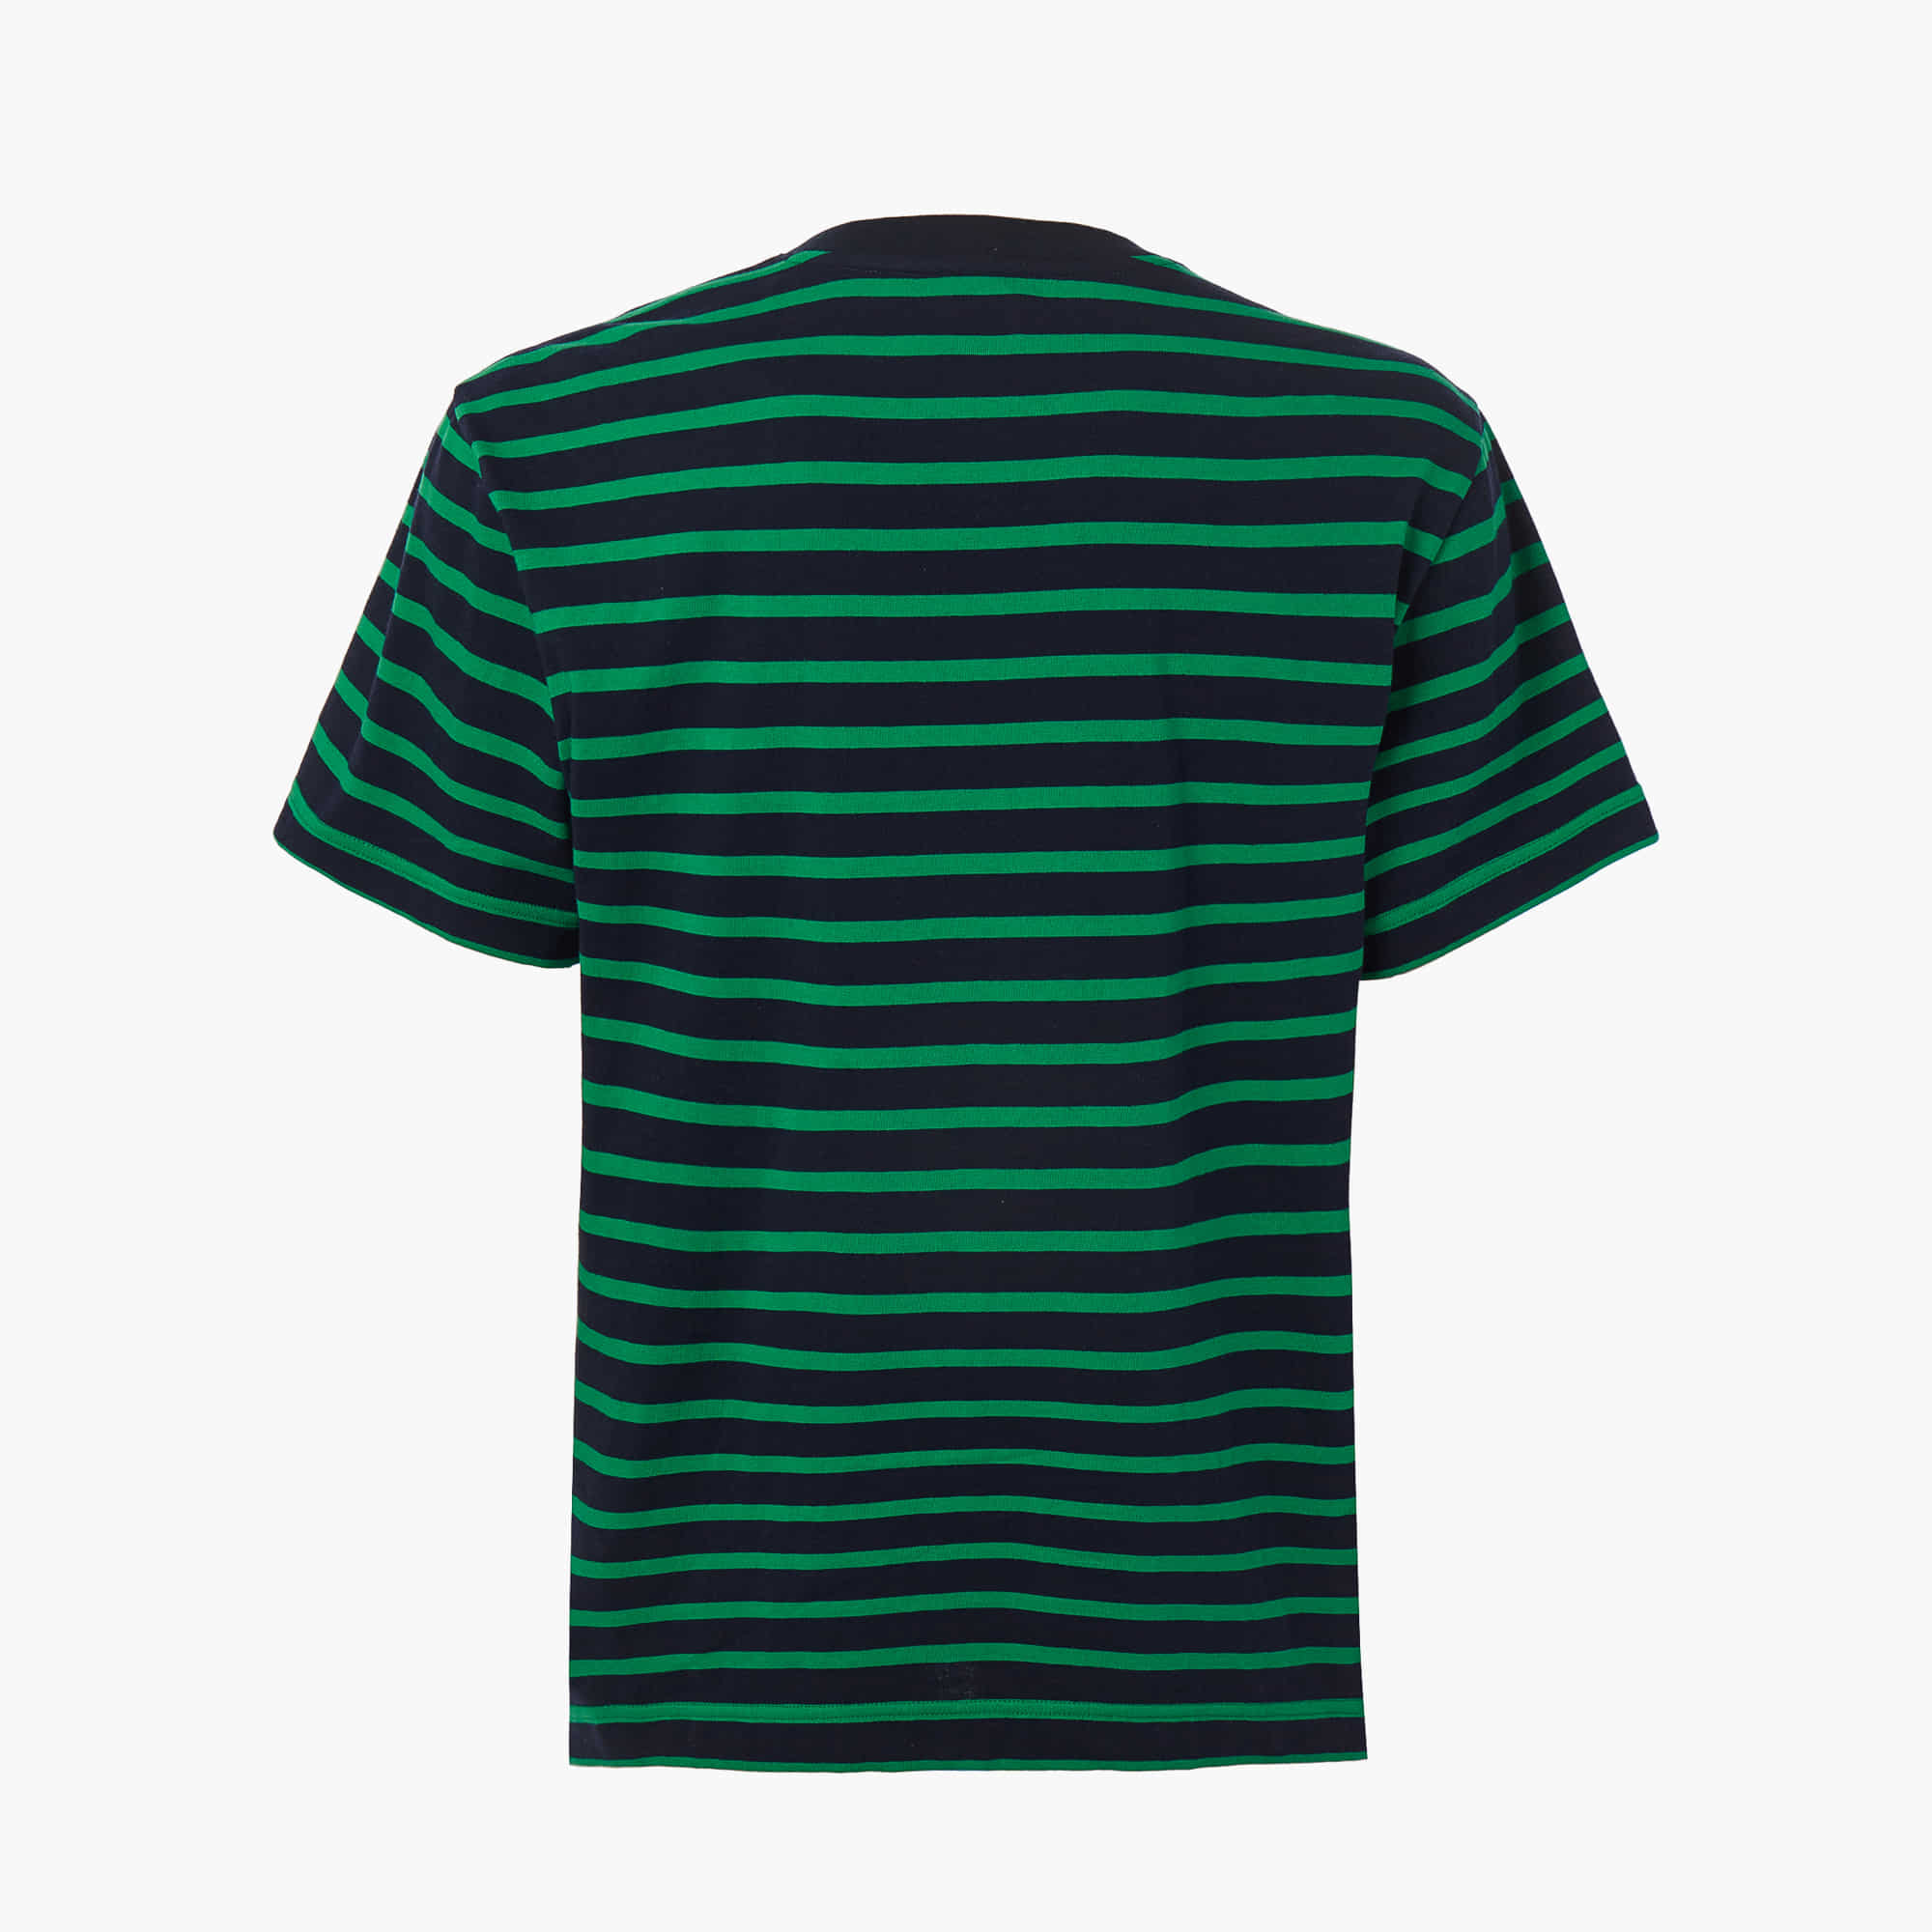 (UNISEX) SLOW LIFE STRIPED T-SHIRT - LINGER GALLERY